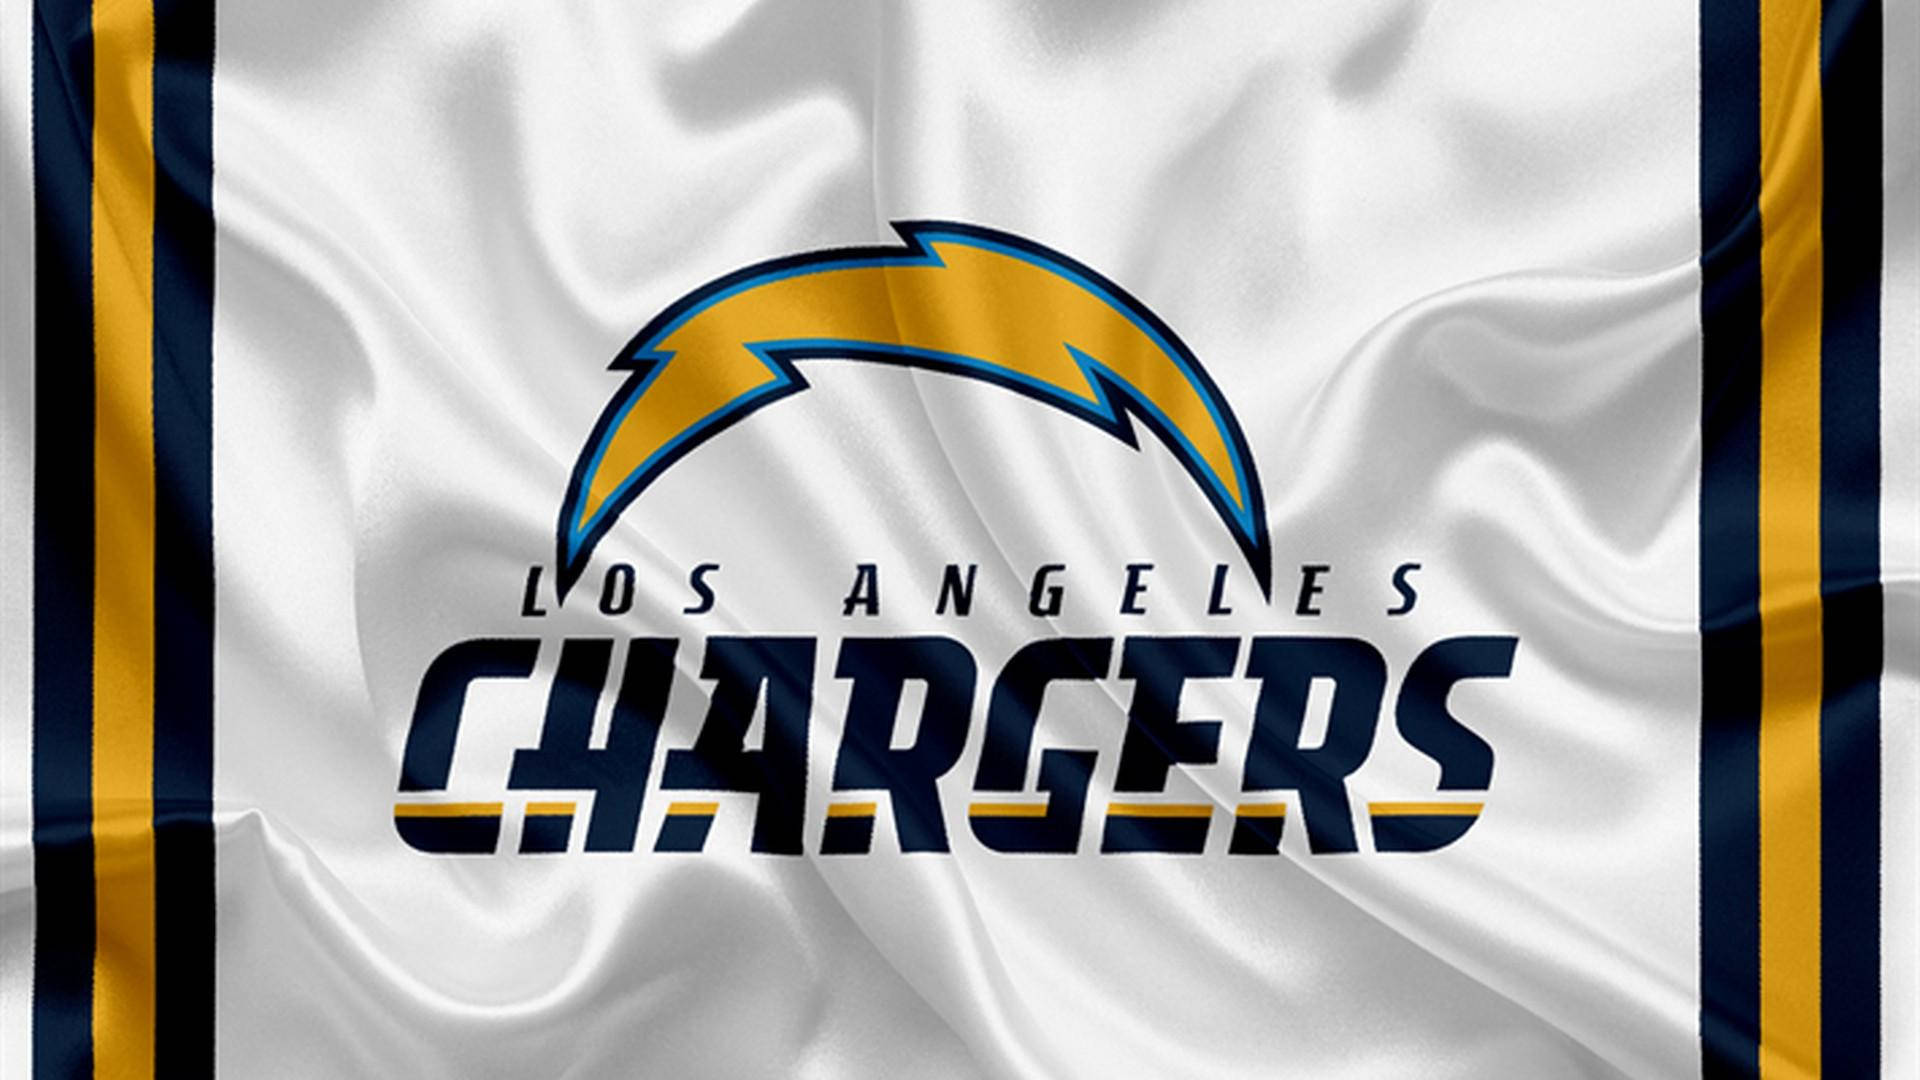 Los Angeles Chargers Background Wallpaper